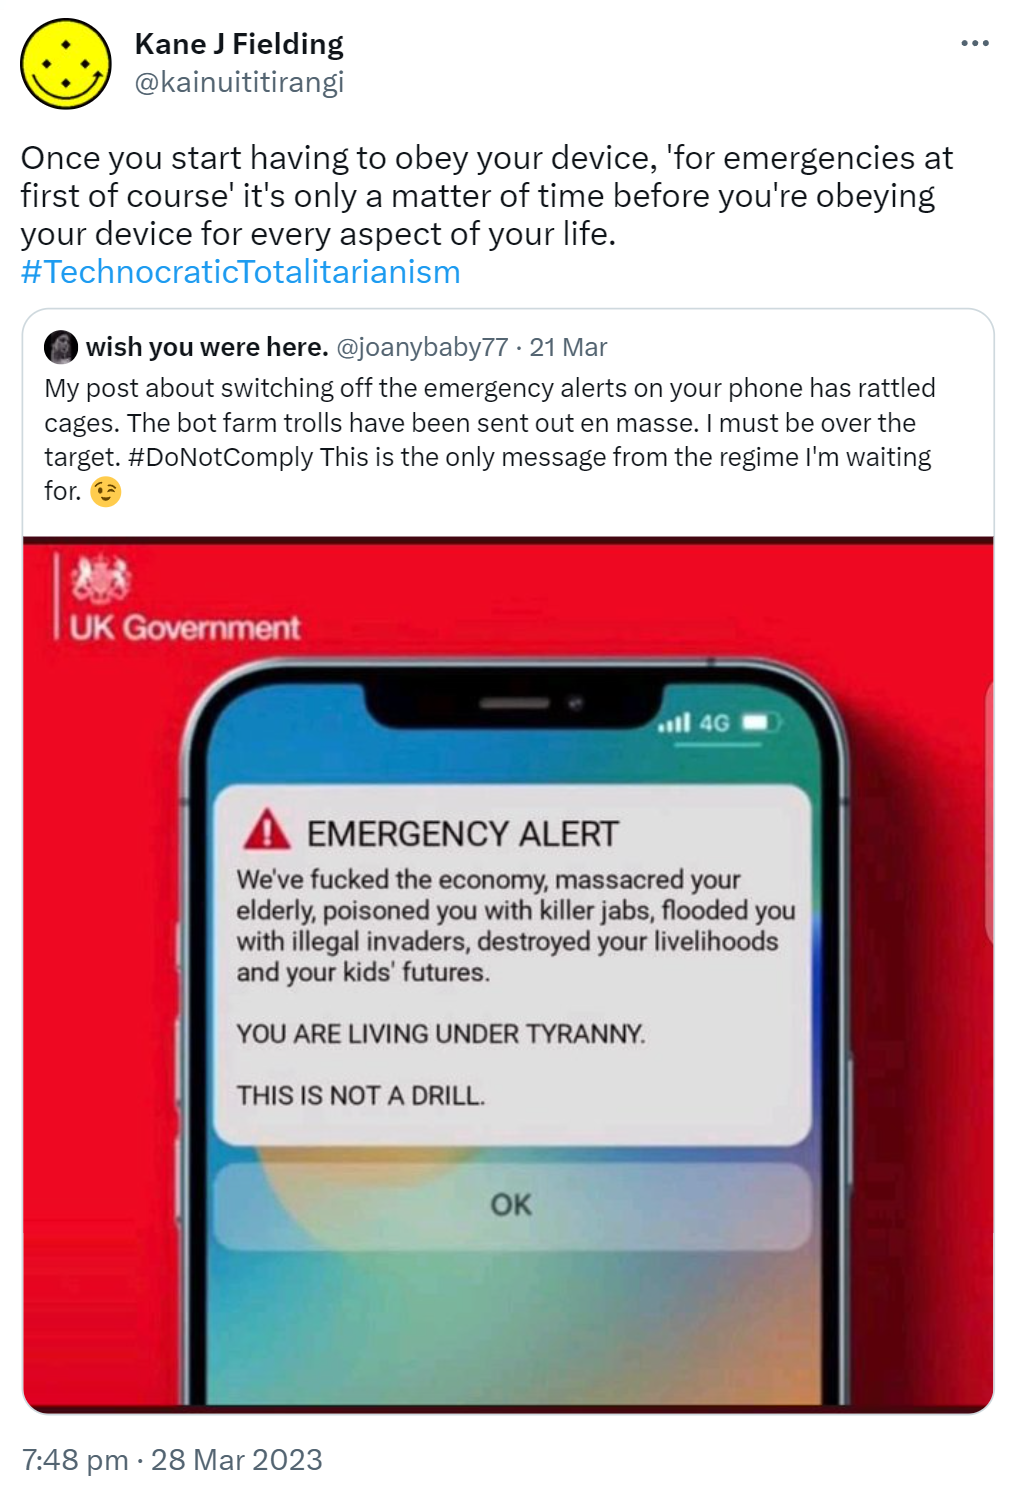 Once you start having to obey your device, 'for emergencies at first of course' it's only a matter of time before you're obeying your device for every aspect of your life. Hashtag Technocratic Totalitarianism. Quote Tweet, Wish you were here @joanybaby77. My post about switching off the emergency alerts on your phone has rattled cages. The bot farm trolls have been sent out en masse. I must be over the target. Hashtag Do Not Comply This is the only message from the regime I'm waiting for. 7:48 pm · 28 Mar 2023.